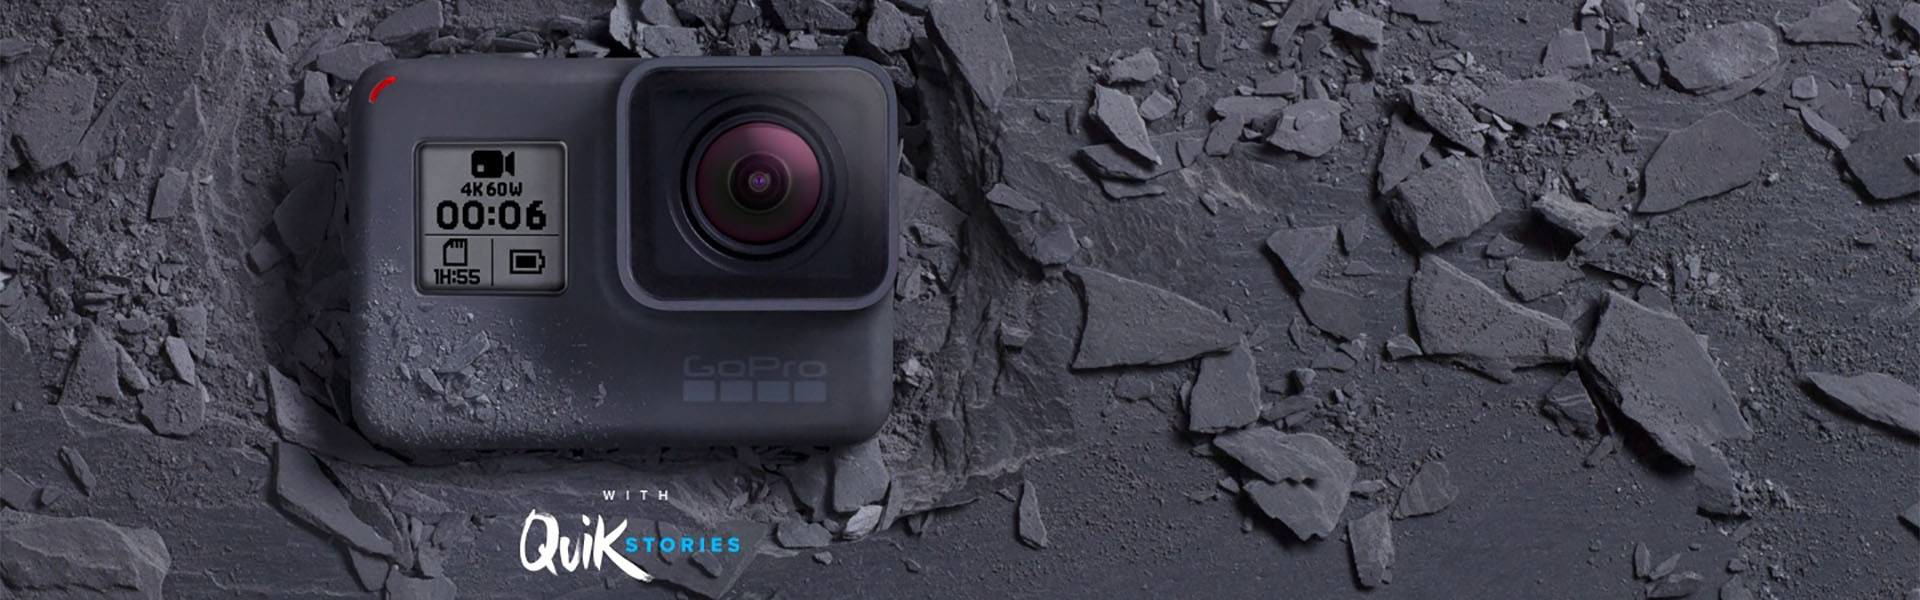 GoPro HERO6 sets New Bar for Image Quality, Stabilization and Simplicity 13